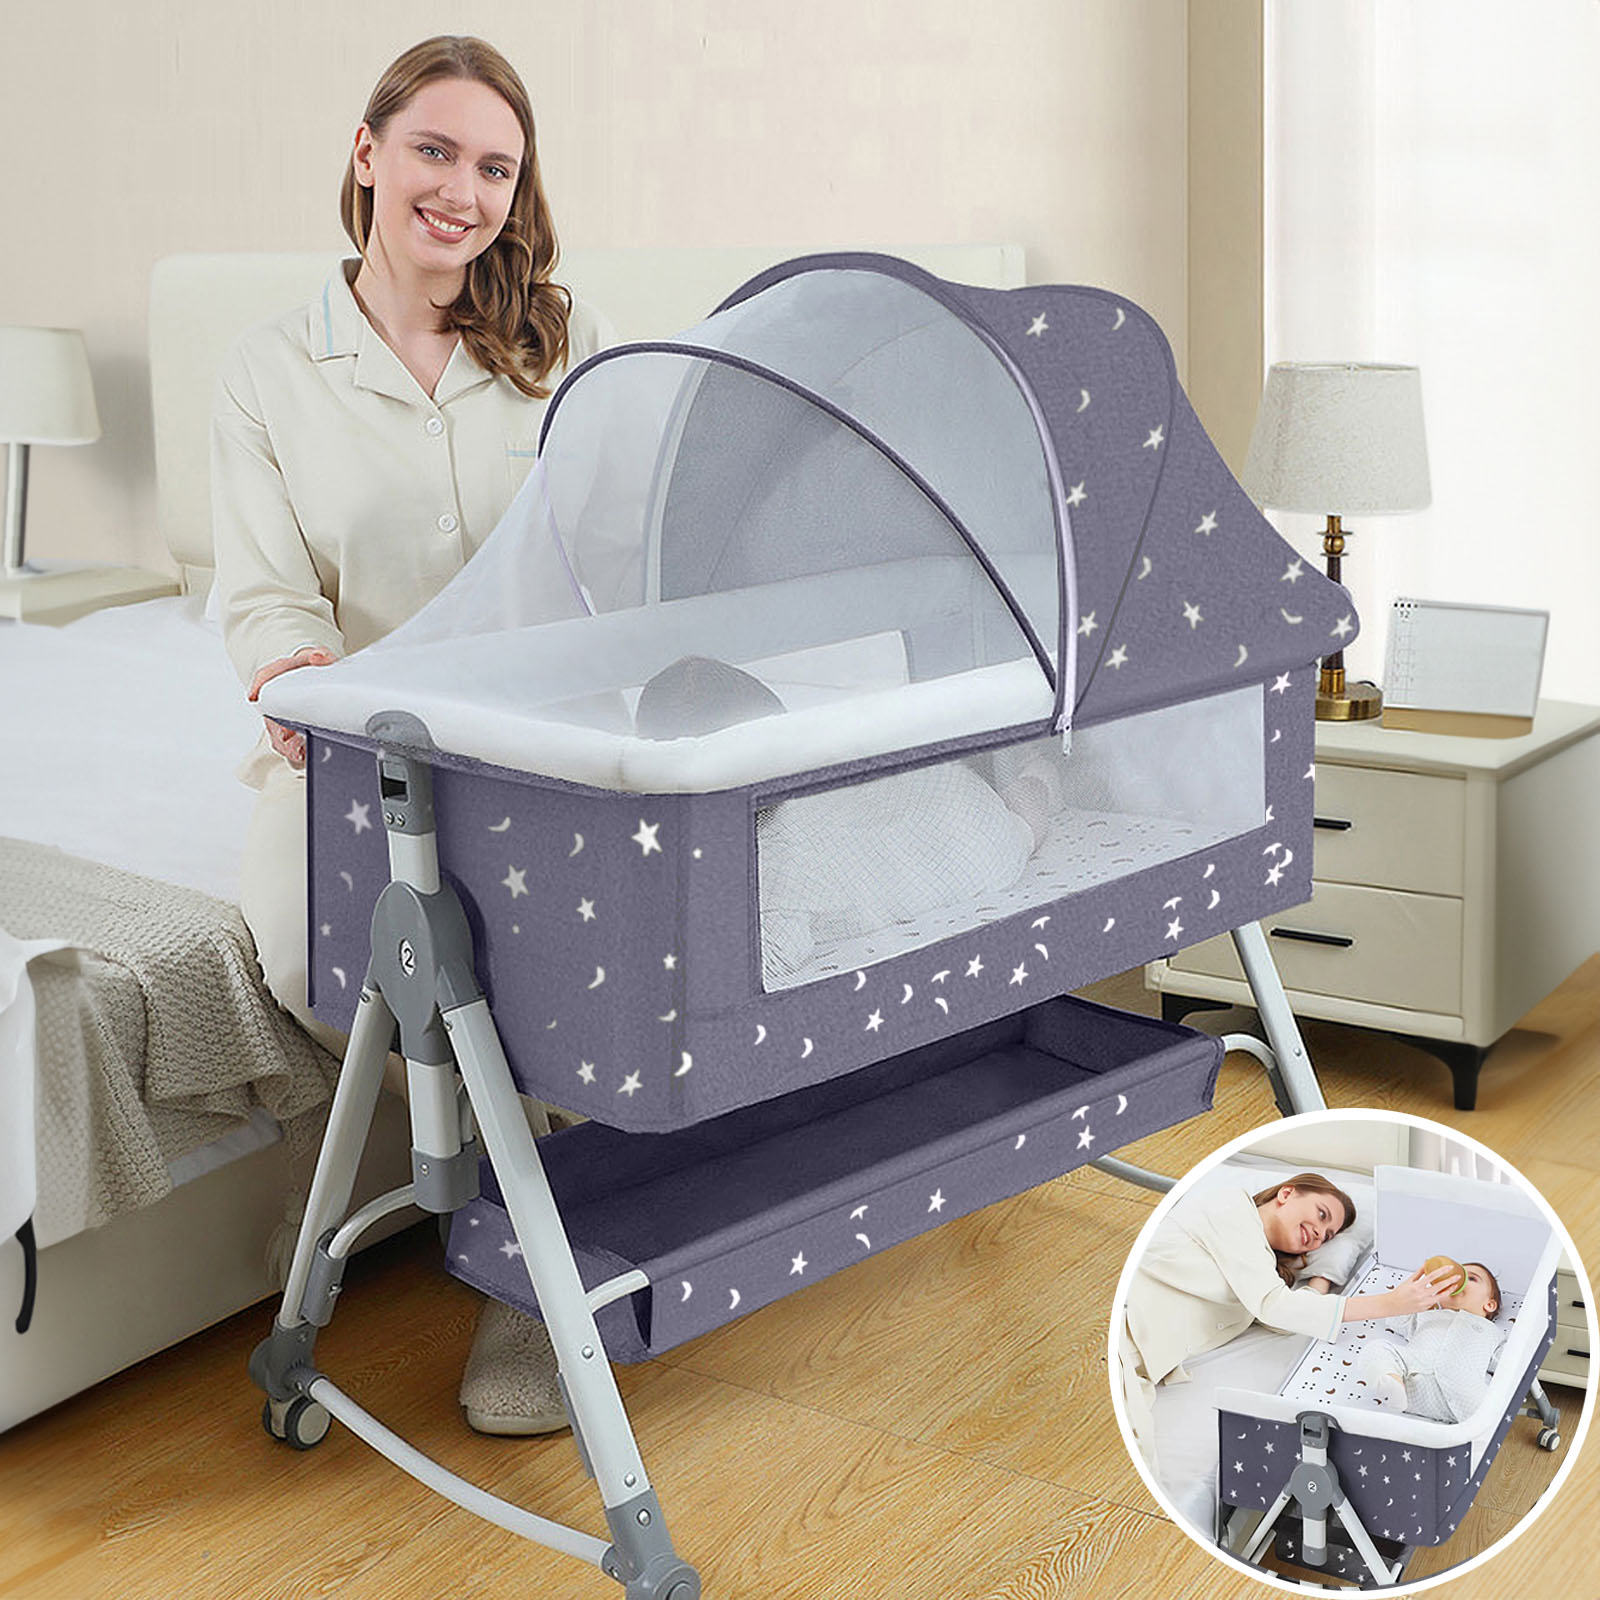 EONROACOO Foldable Baby Bassinet with Changing Table, Adjustable Bedside Crib for Infant, Moyan Starry Sky - image 1 of 11